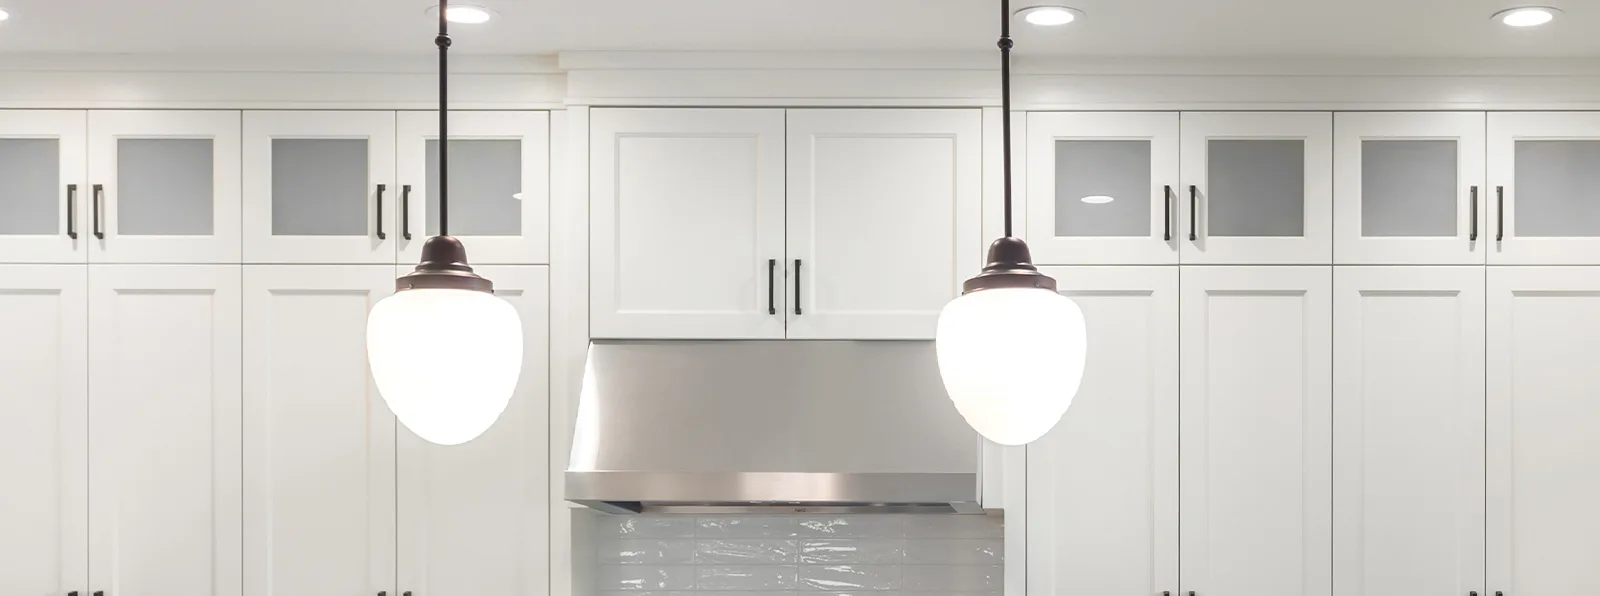 A kitchen with pendant lights 